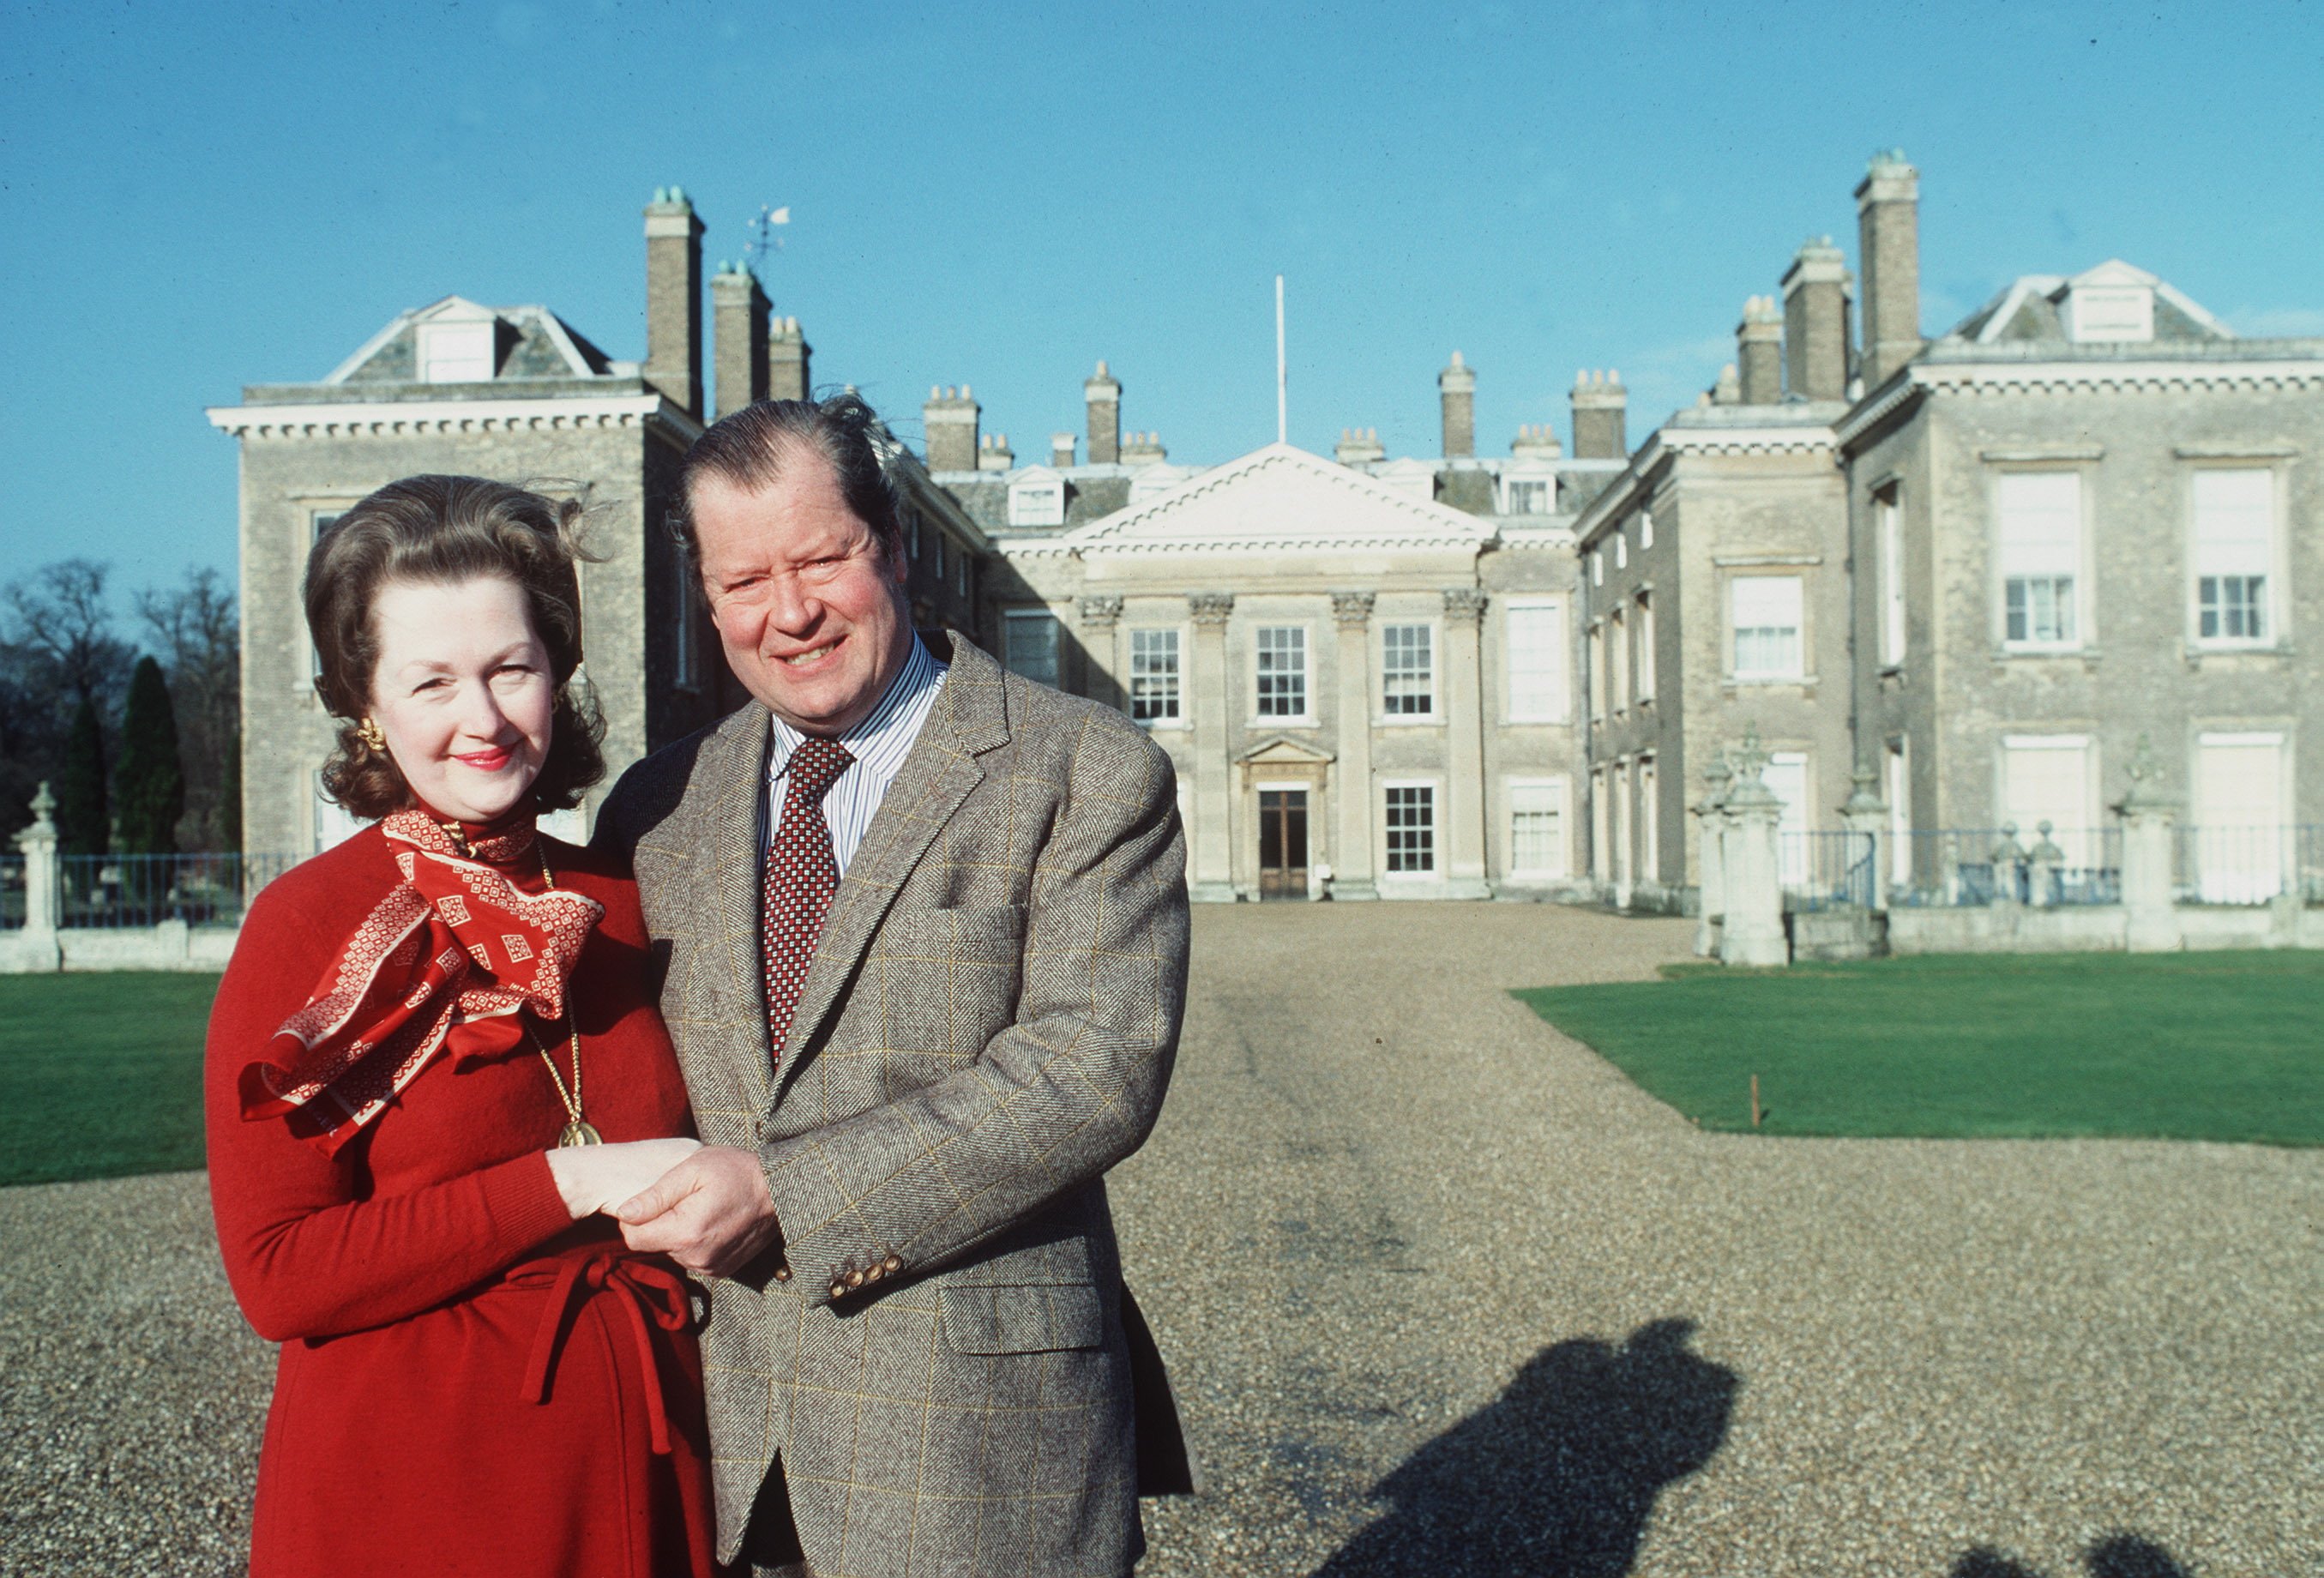 Earl Spencer pictured with his wife Raine Spencer in front of their home Althorp House. / Source: Getty Images